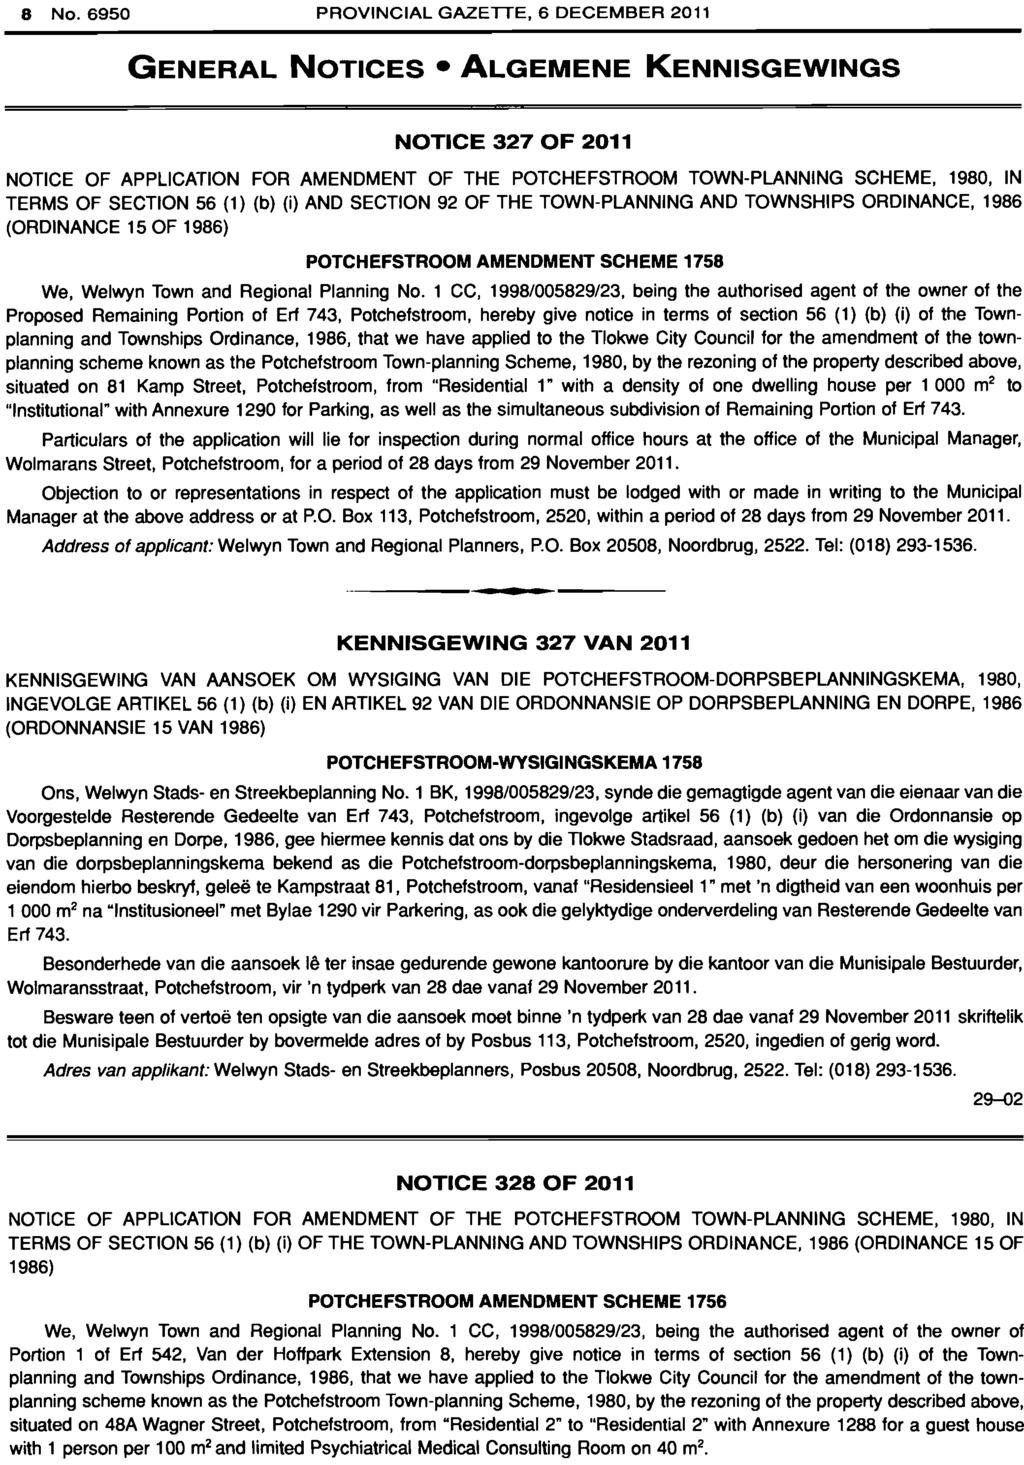 8 No. PROVINCIAL GAZETTE, 6 DECEMBER 2011 GENERAL NOTICES ALGEMENE KENNISGEWINGS NOTICE 327 OF 2011 NOTICE OF APPLICATION FOR AMENDMENT OF THE POTCHEFSTROOM TOWN-PLANNING SCHEME, 1980, IN TERMS OF